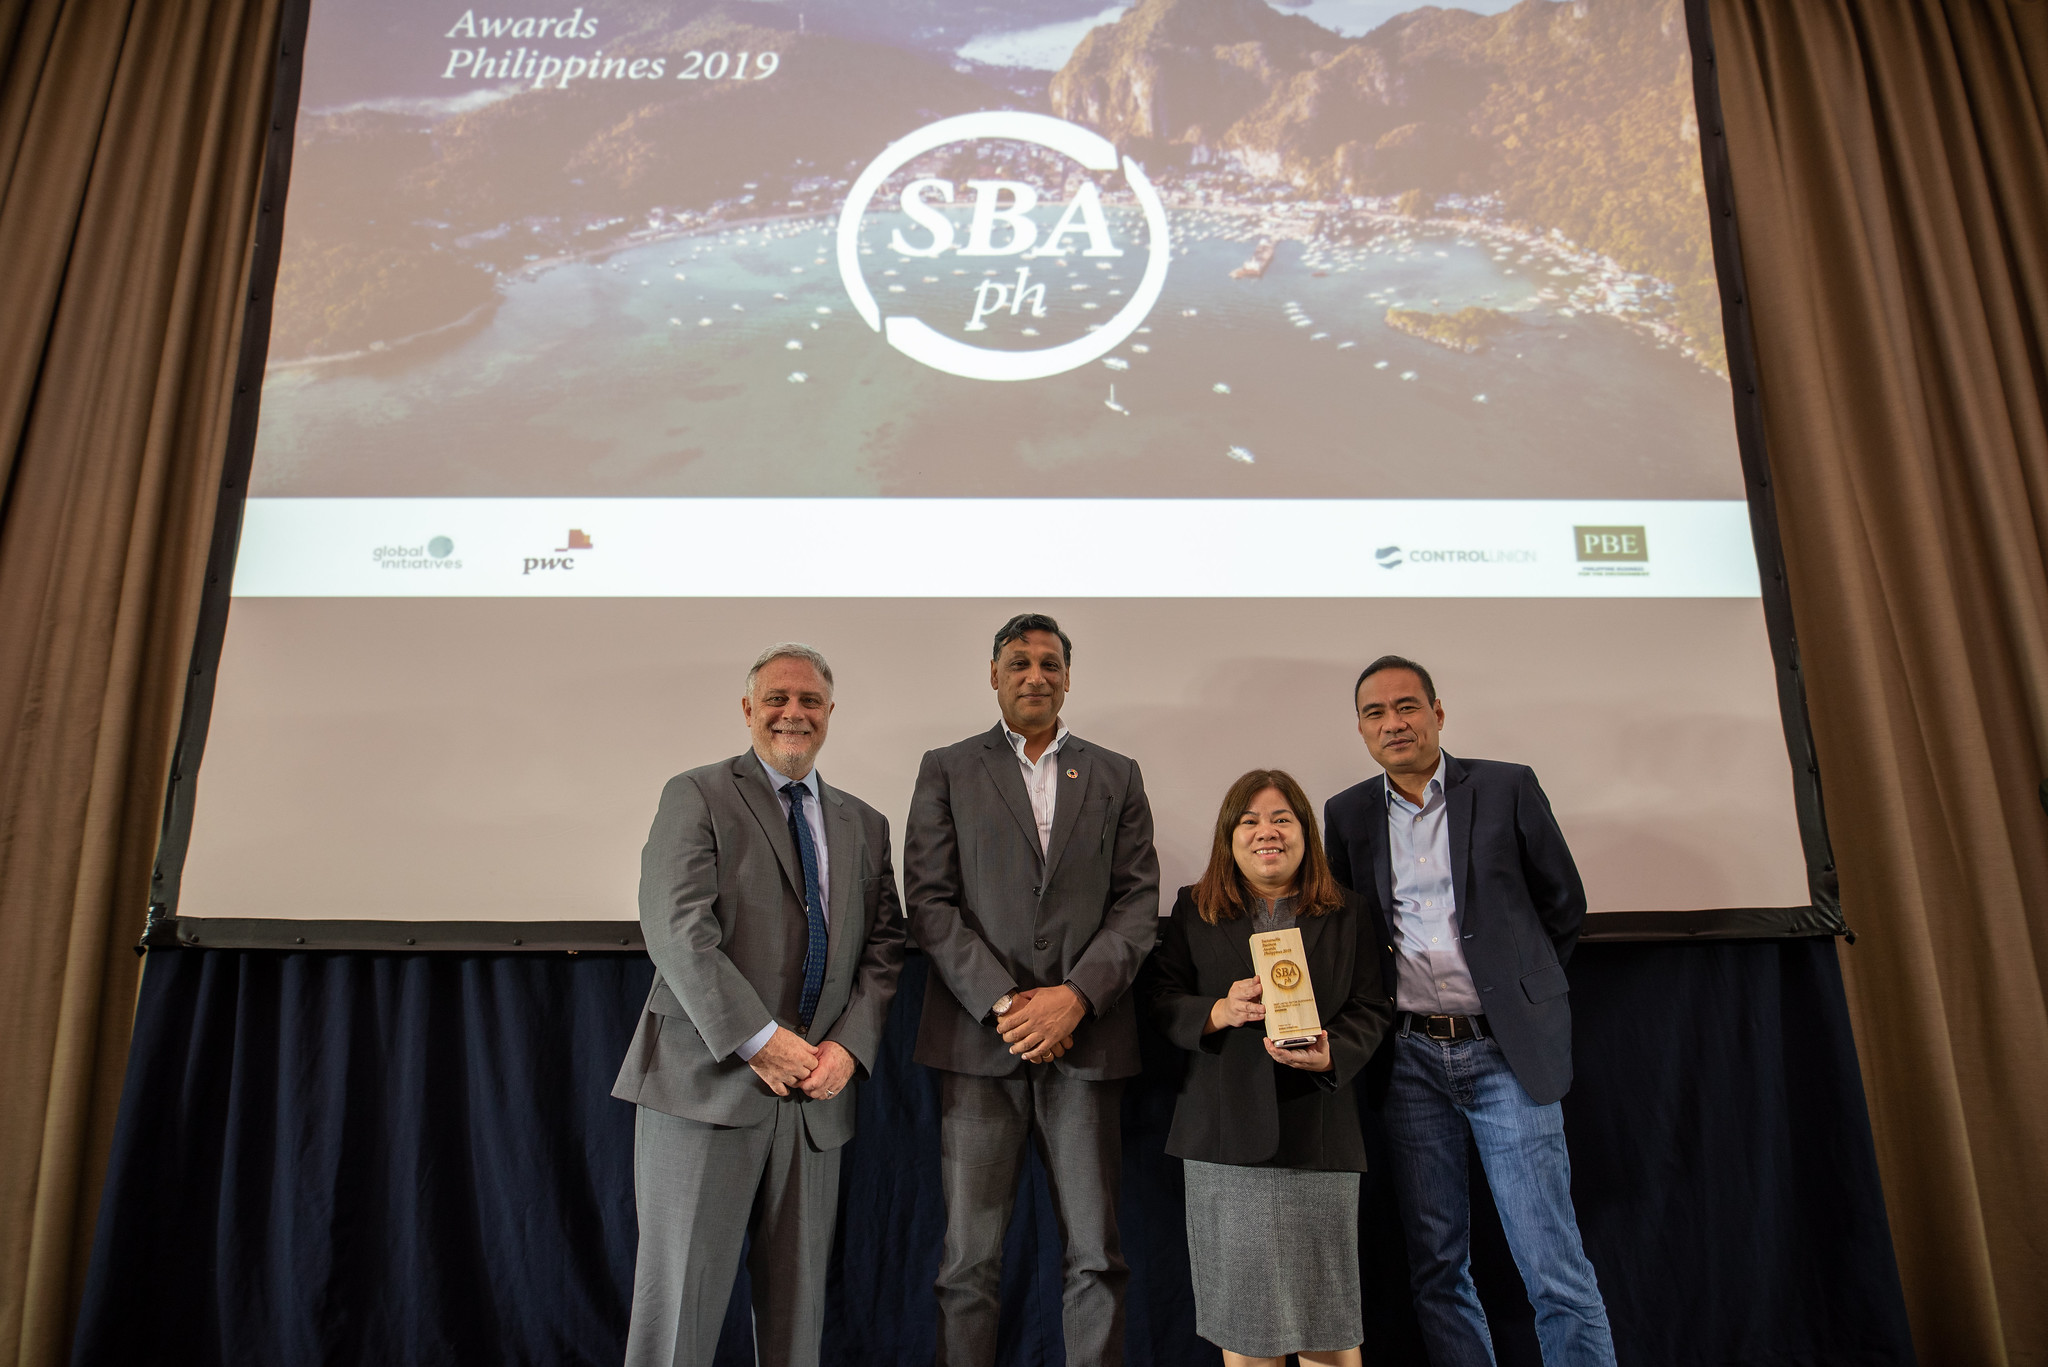 Ericsson grabs two awards at the Sustainable Business Awards Philippines 2019